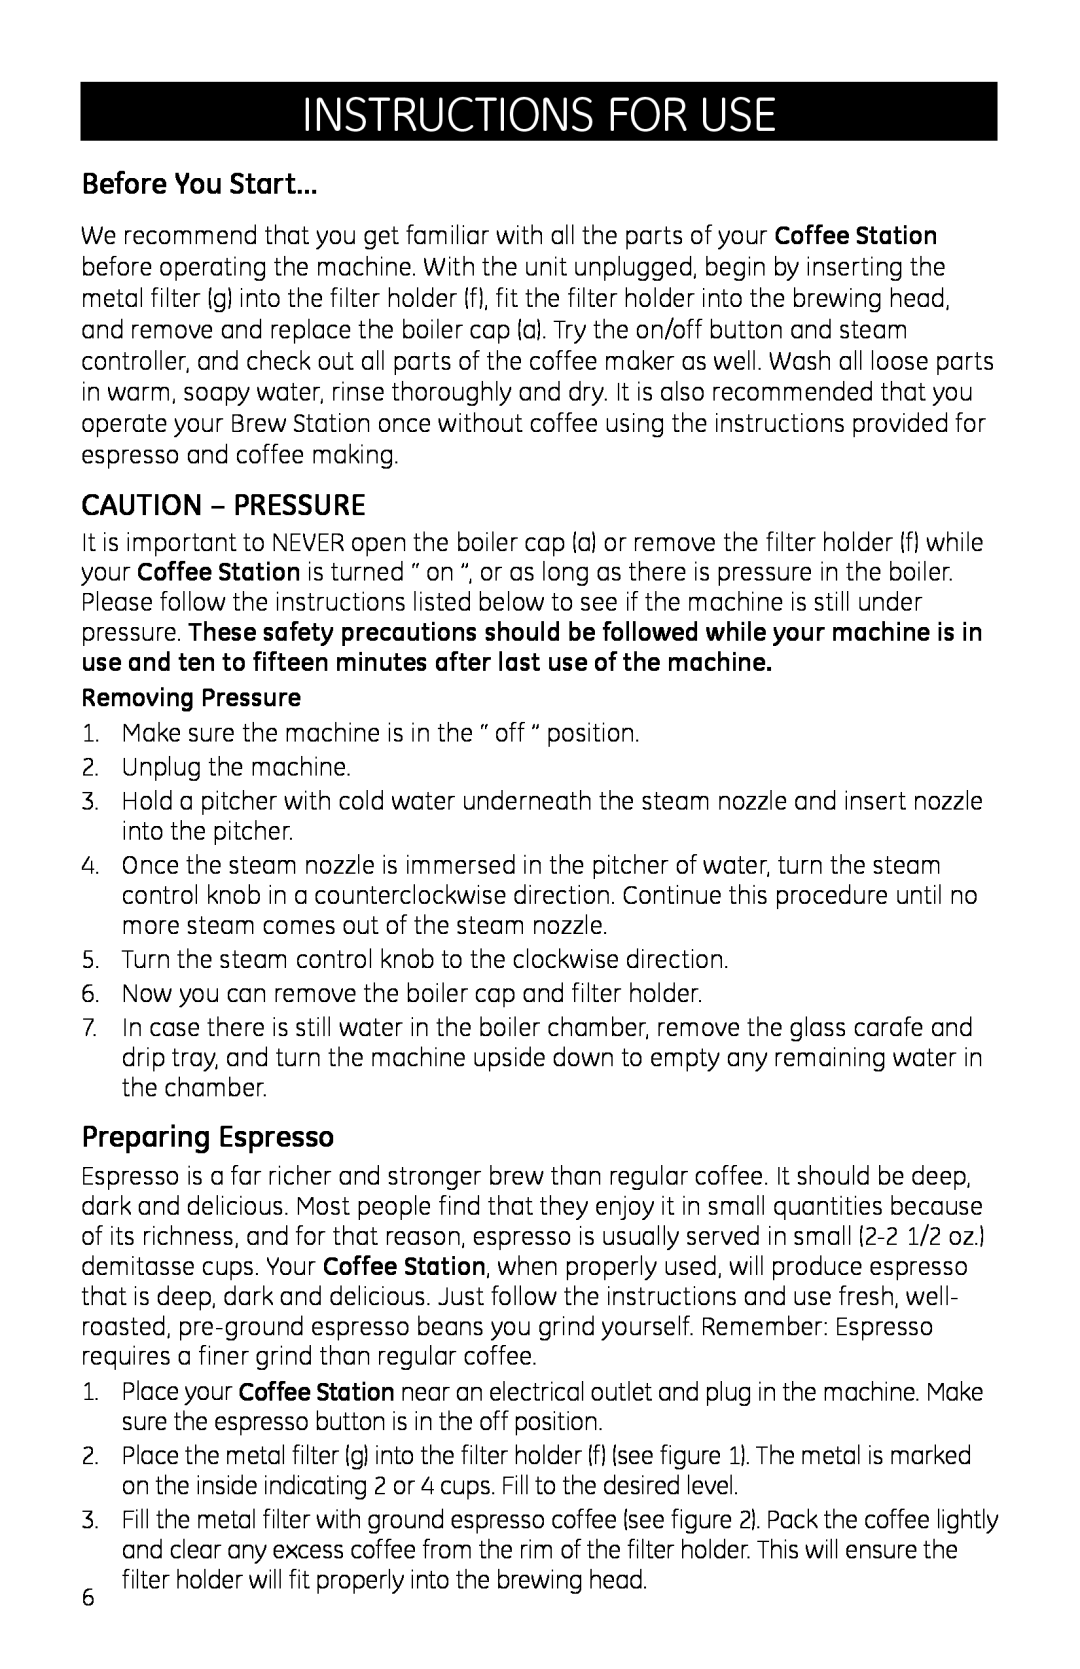 GE 681131690690 manual instructions for use, Before You Start…, Caution - Pressure, Preparing Espresso, Removing Pressure 